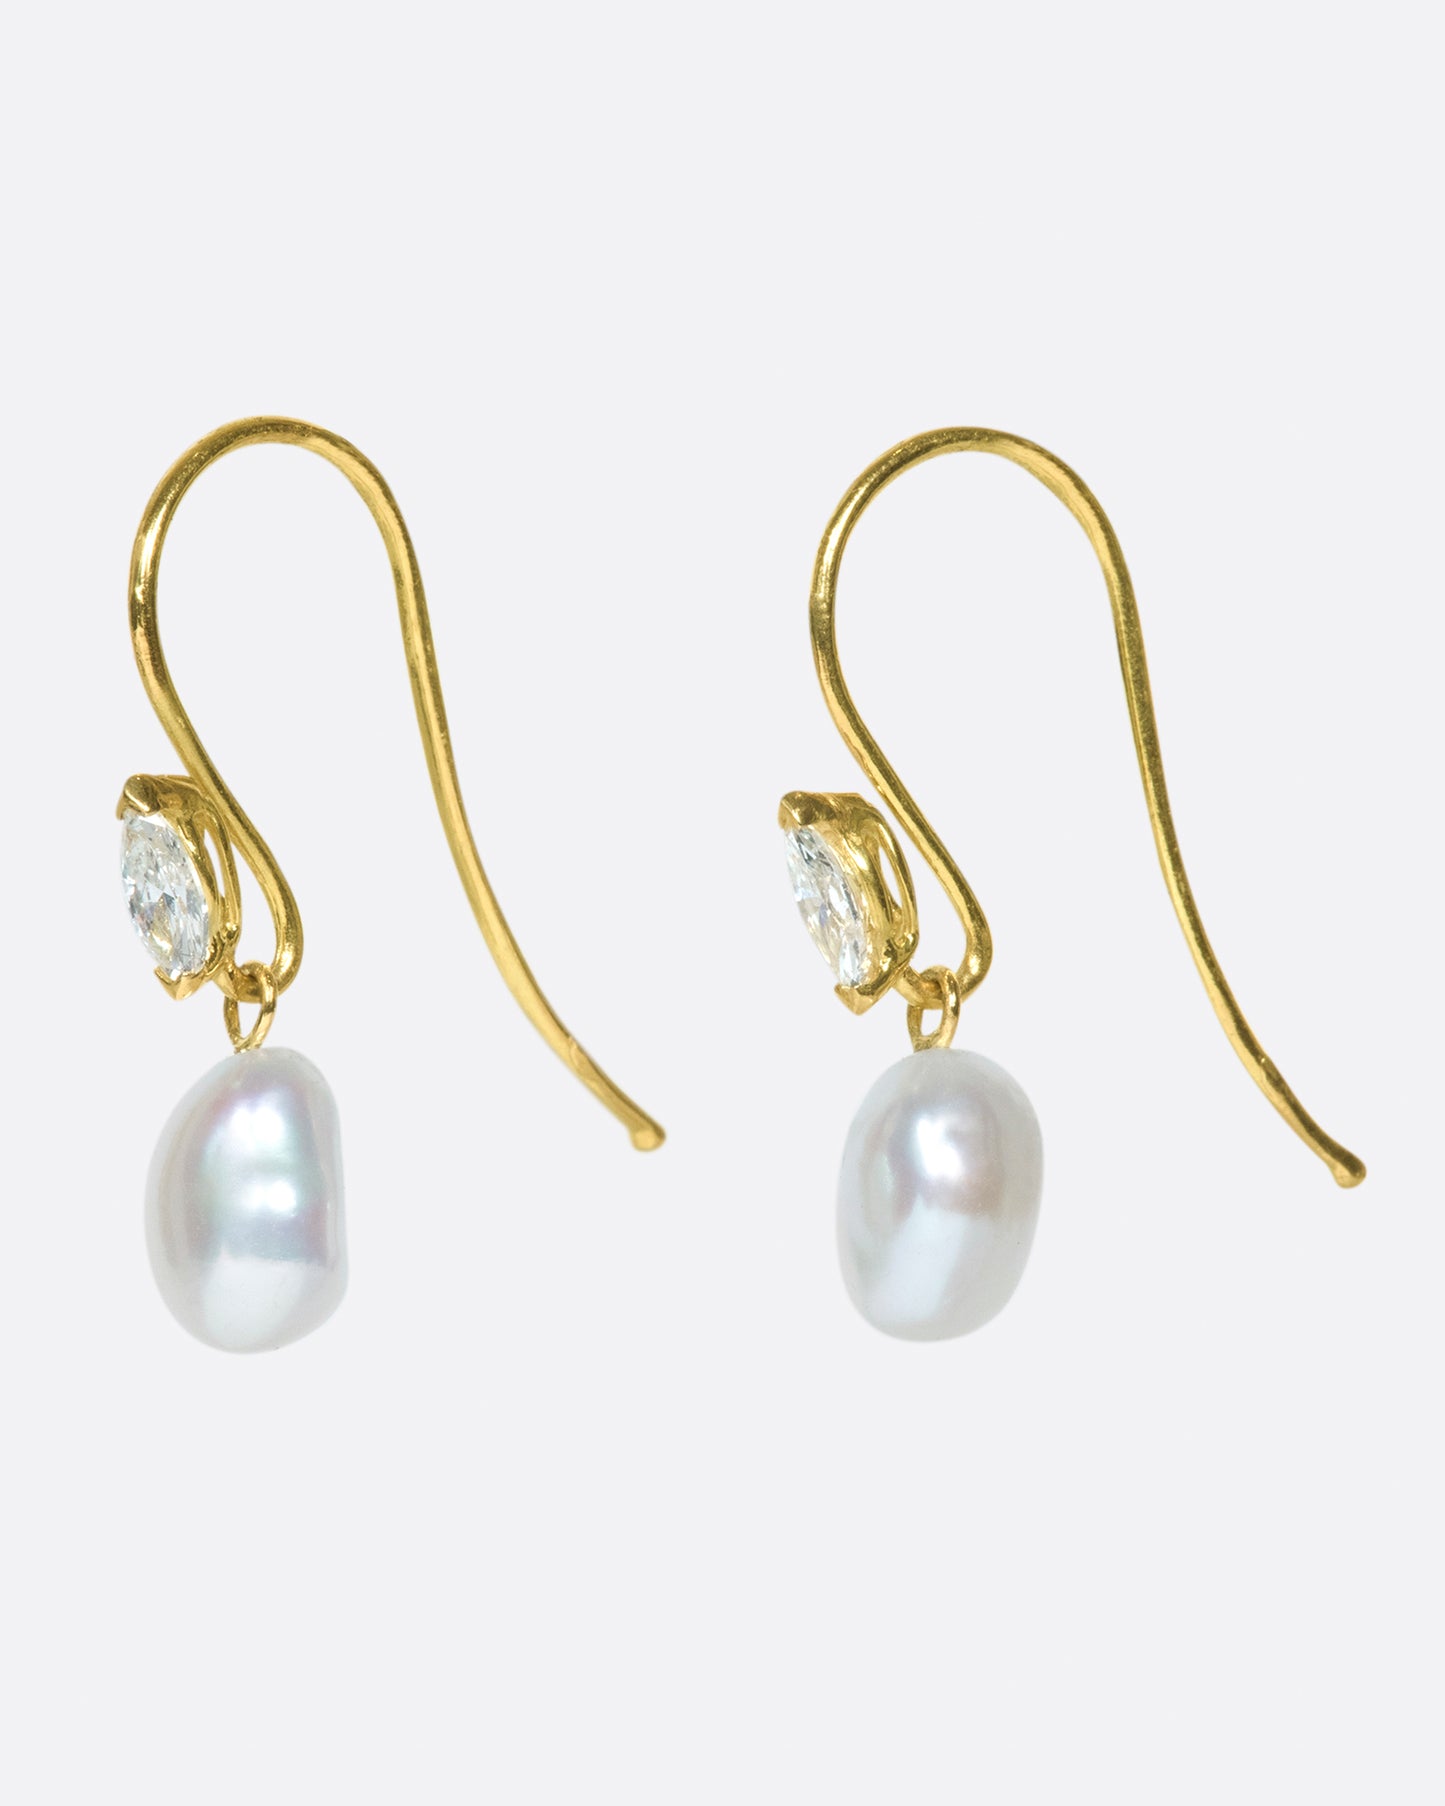 A timeless combination, this time with keshi pearls and marquise diamonds. These earrings really sparkle!